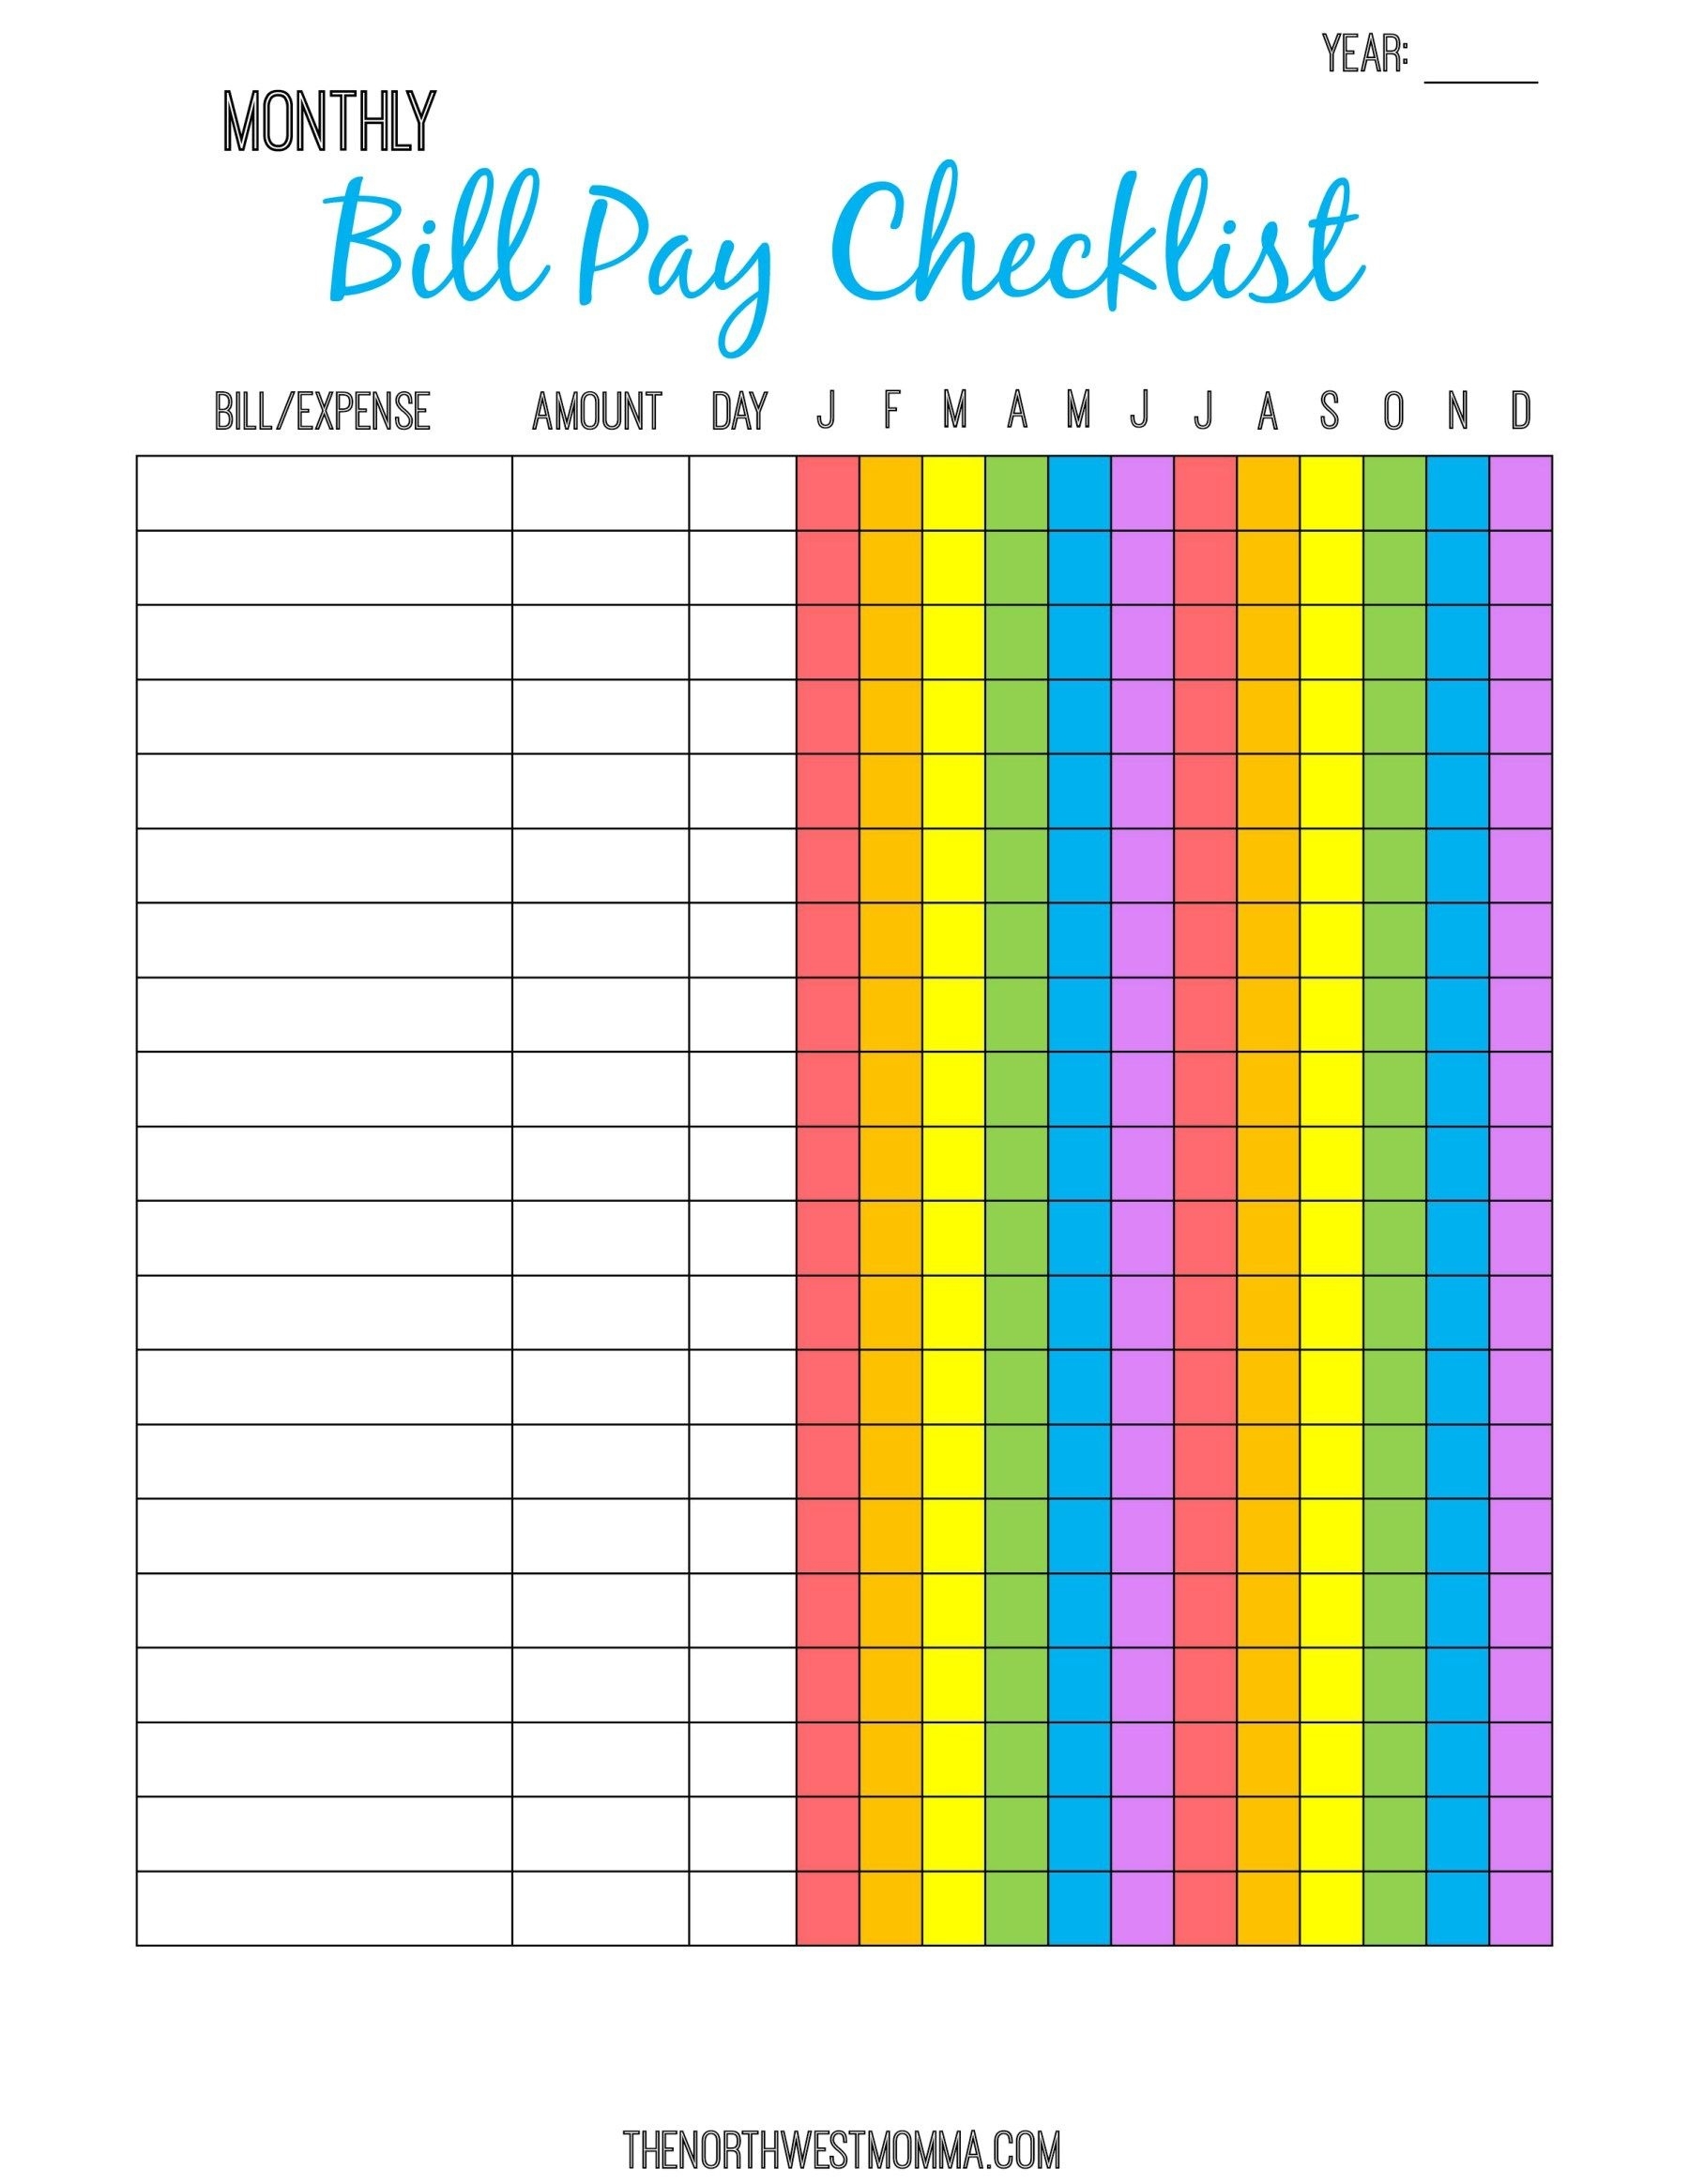 Monthly Bill Pay Checklist- Free Printable | Pinterest | Free  Utility Bills Payment Printable List